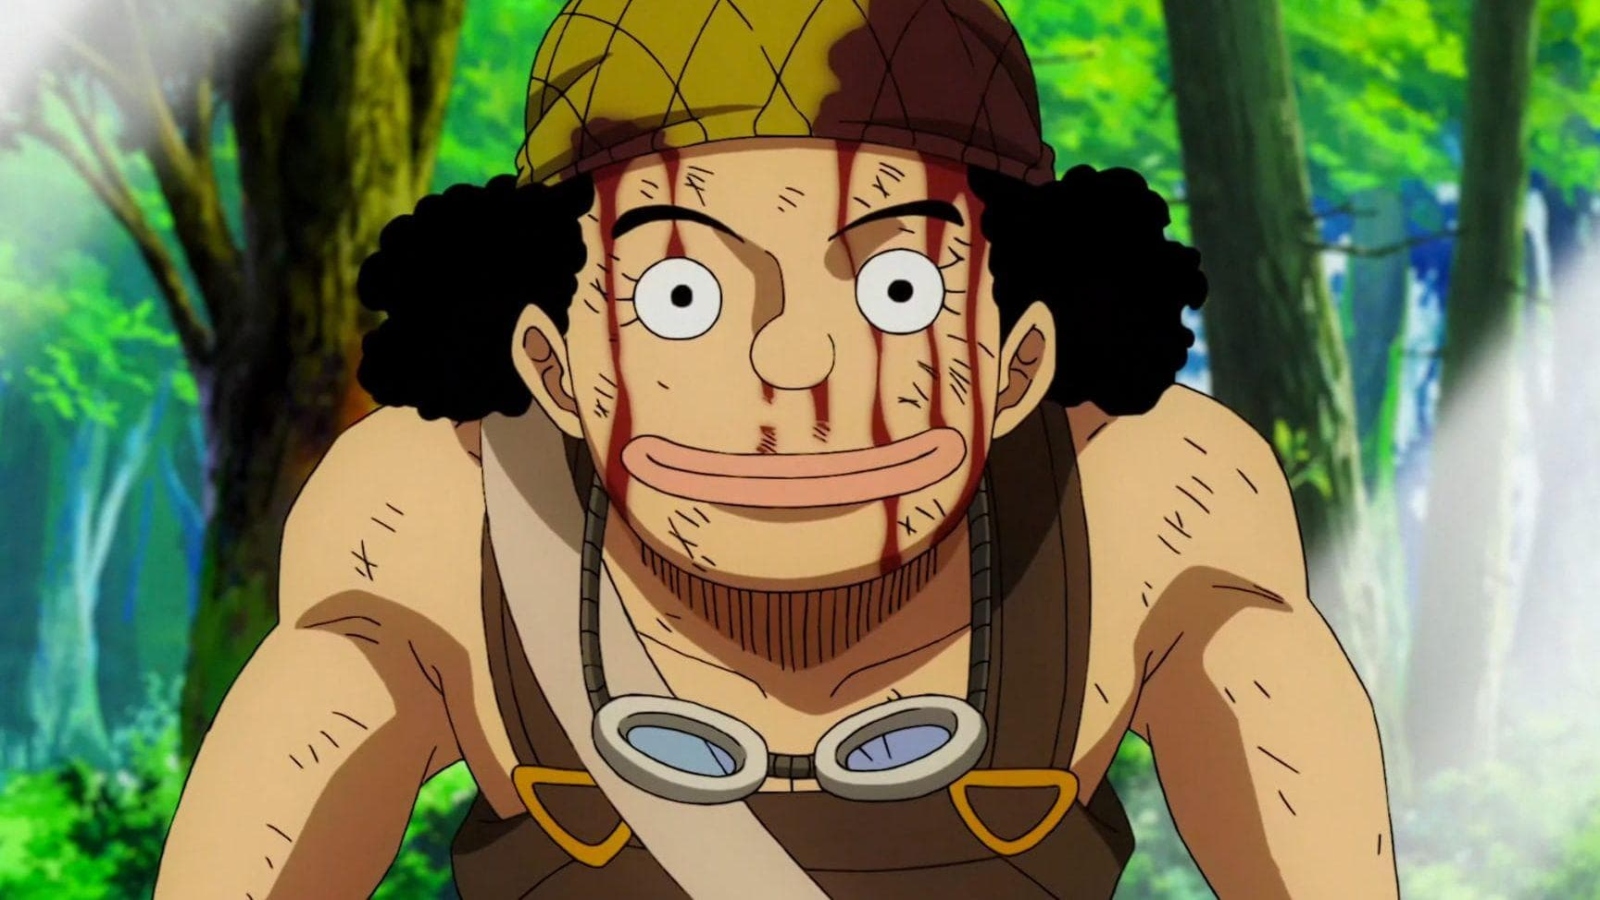 Usopp from One Piece